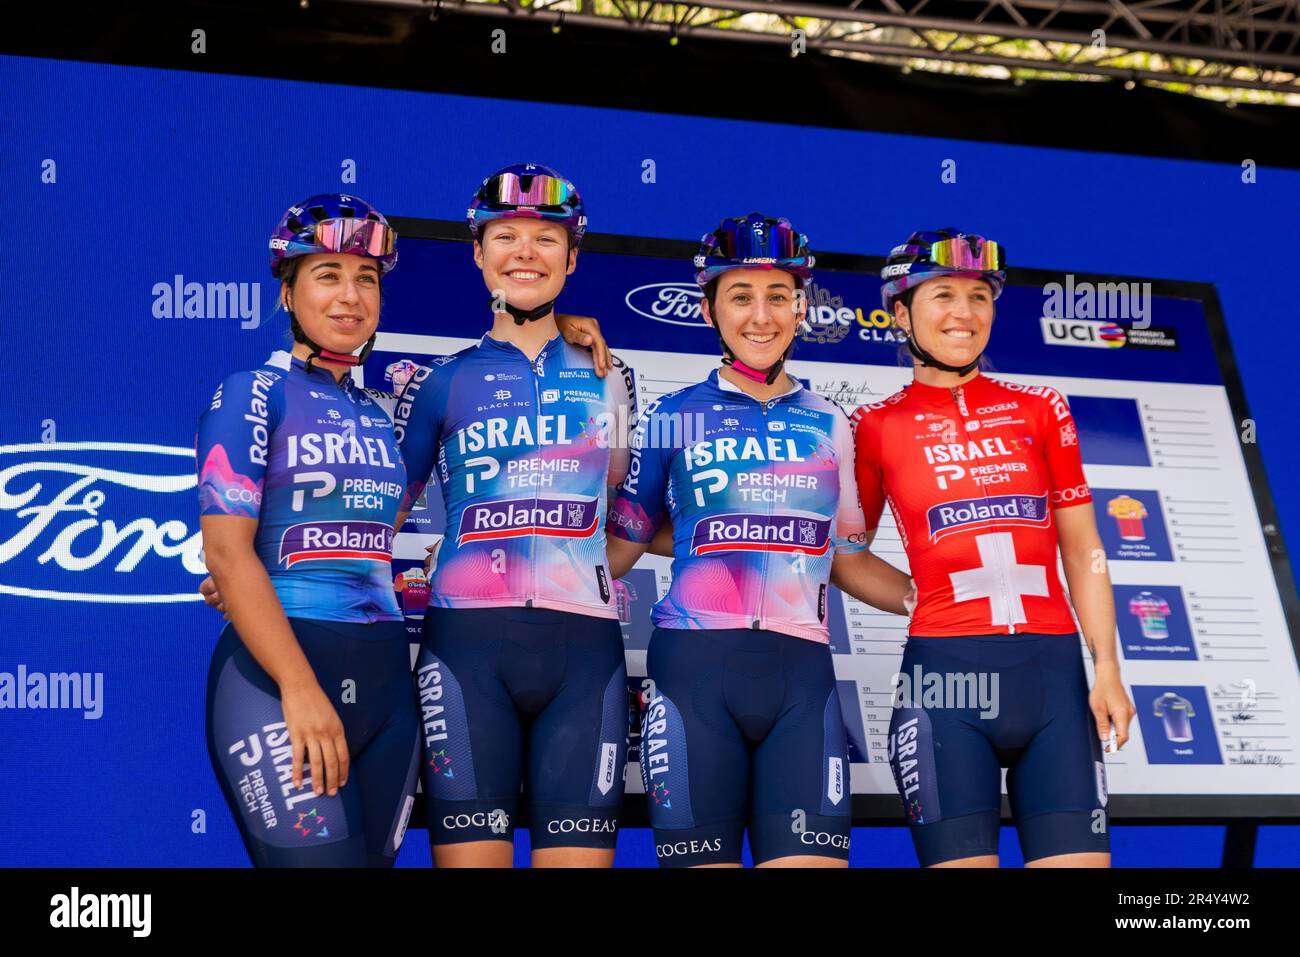 Israel Premier Tech Roland riders before the RideLondon Classique Stage 3 UCI Women's World Tour cycle race around roads in central London, UK. Stock Photo